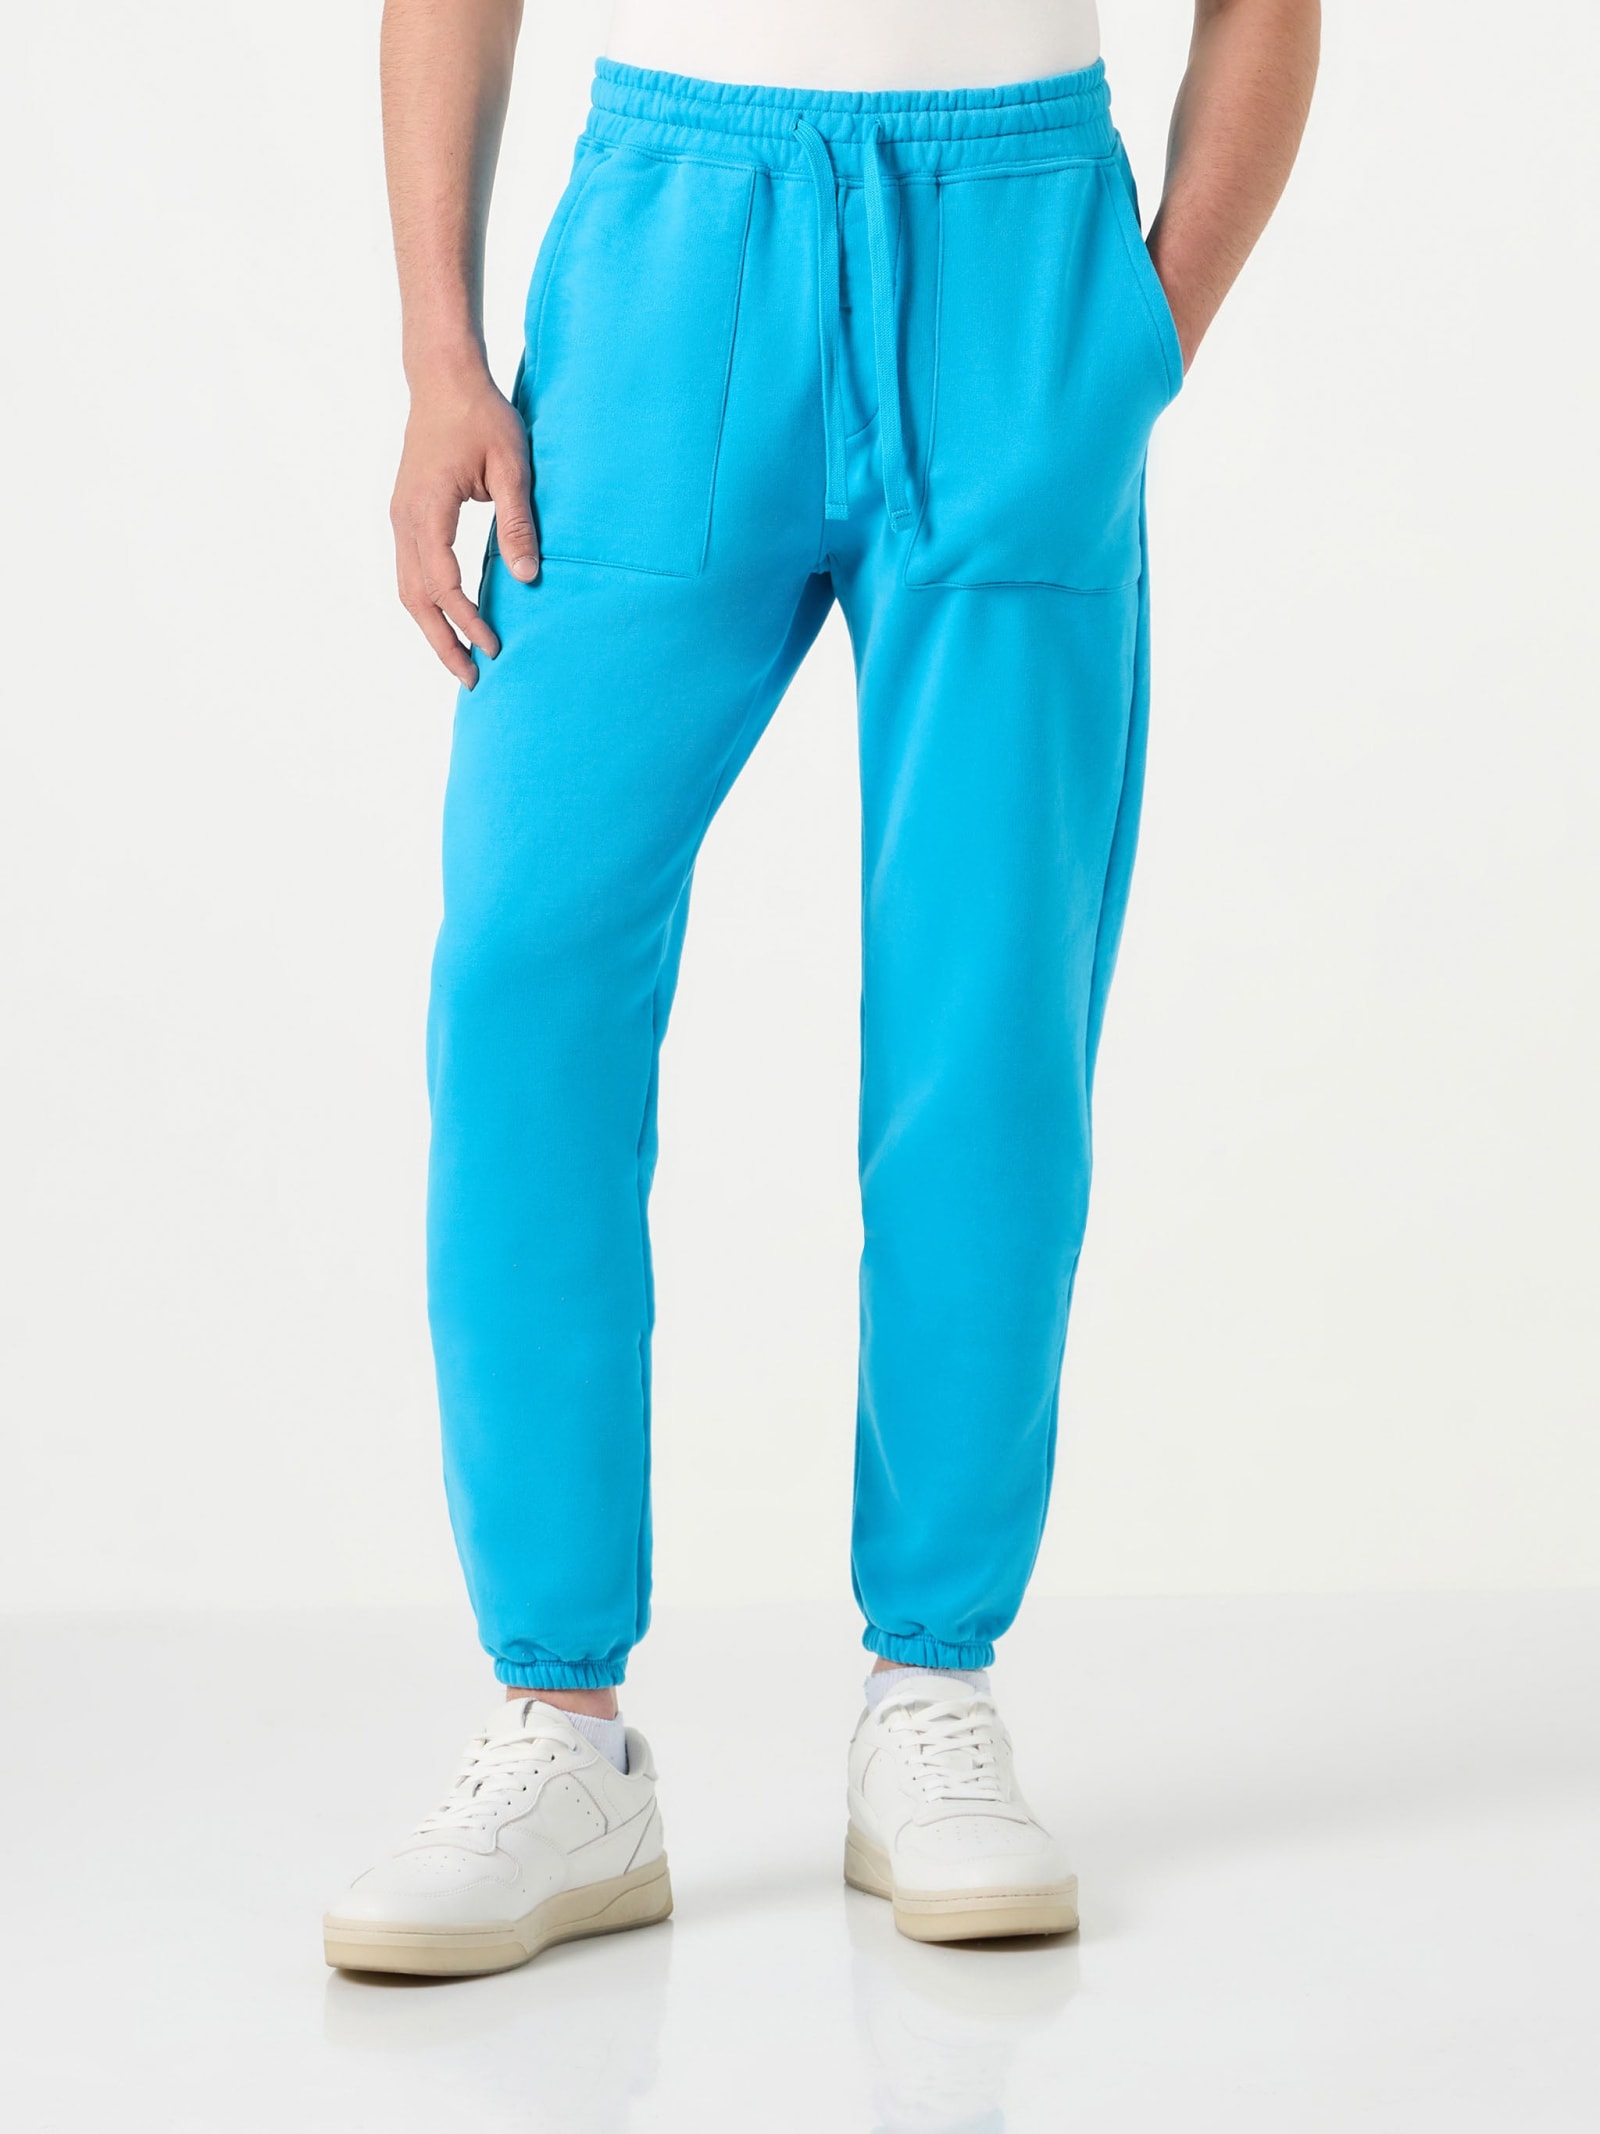 Turquoise Track Pants Pantone Special Edition